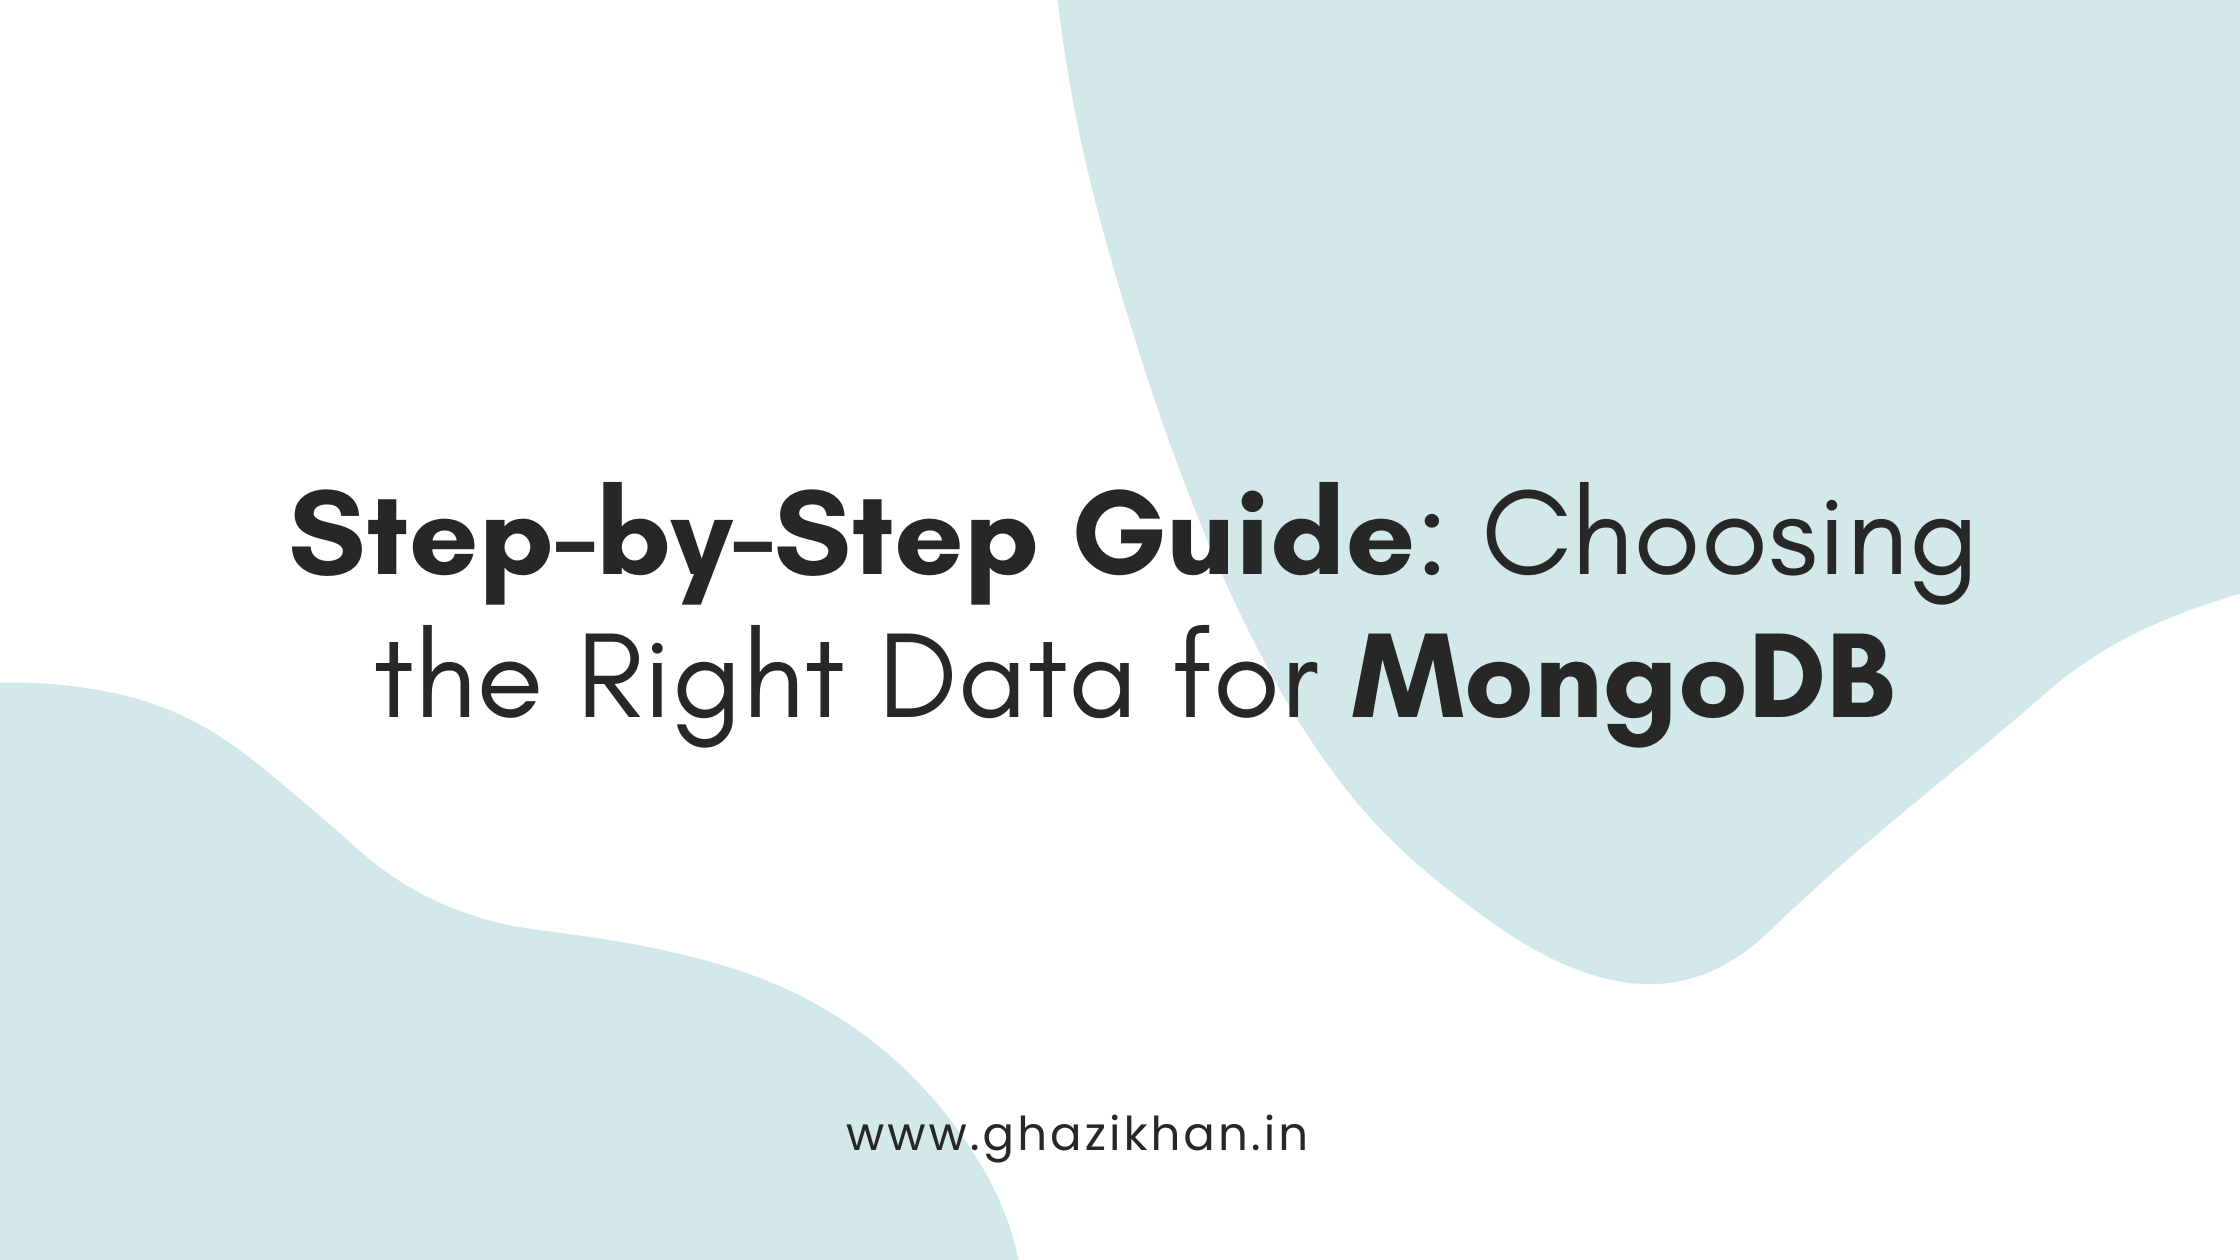 Step-by-Step Guide: Choosing the Right Data for MongoDB